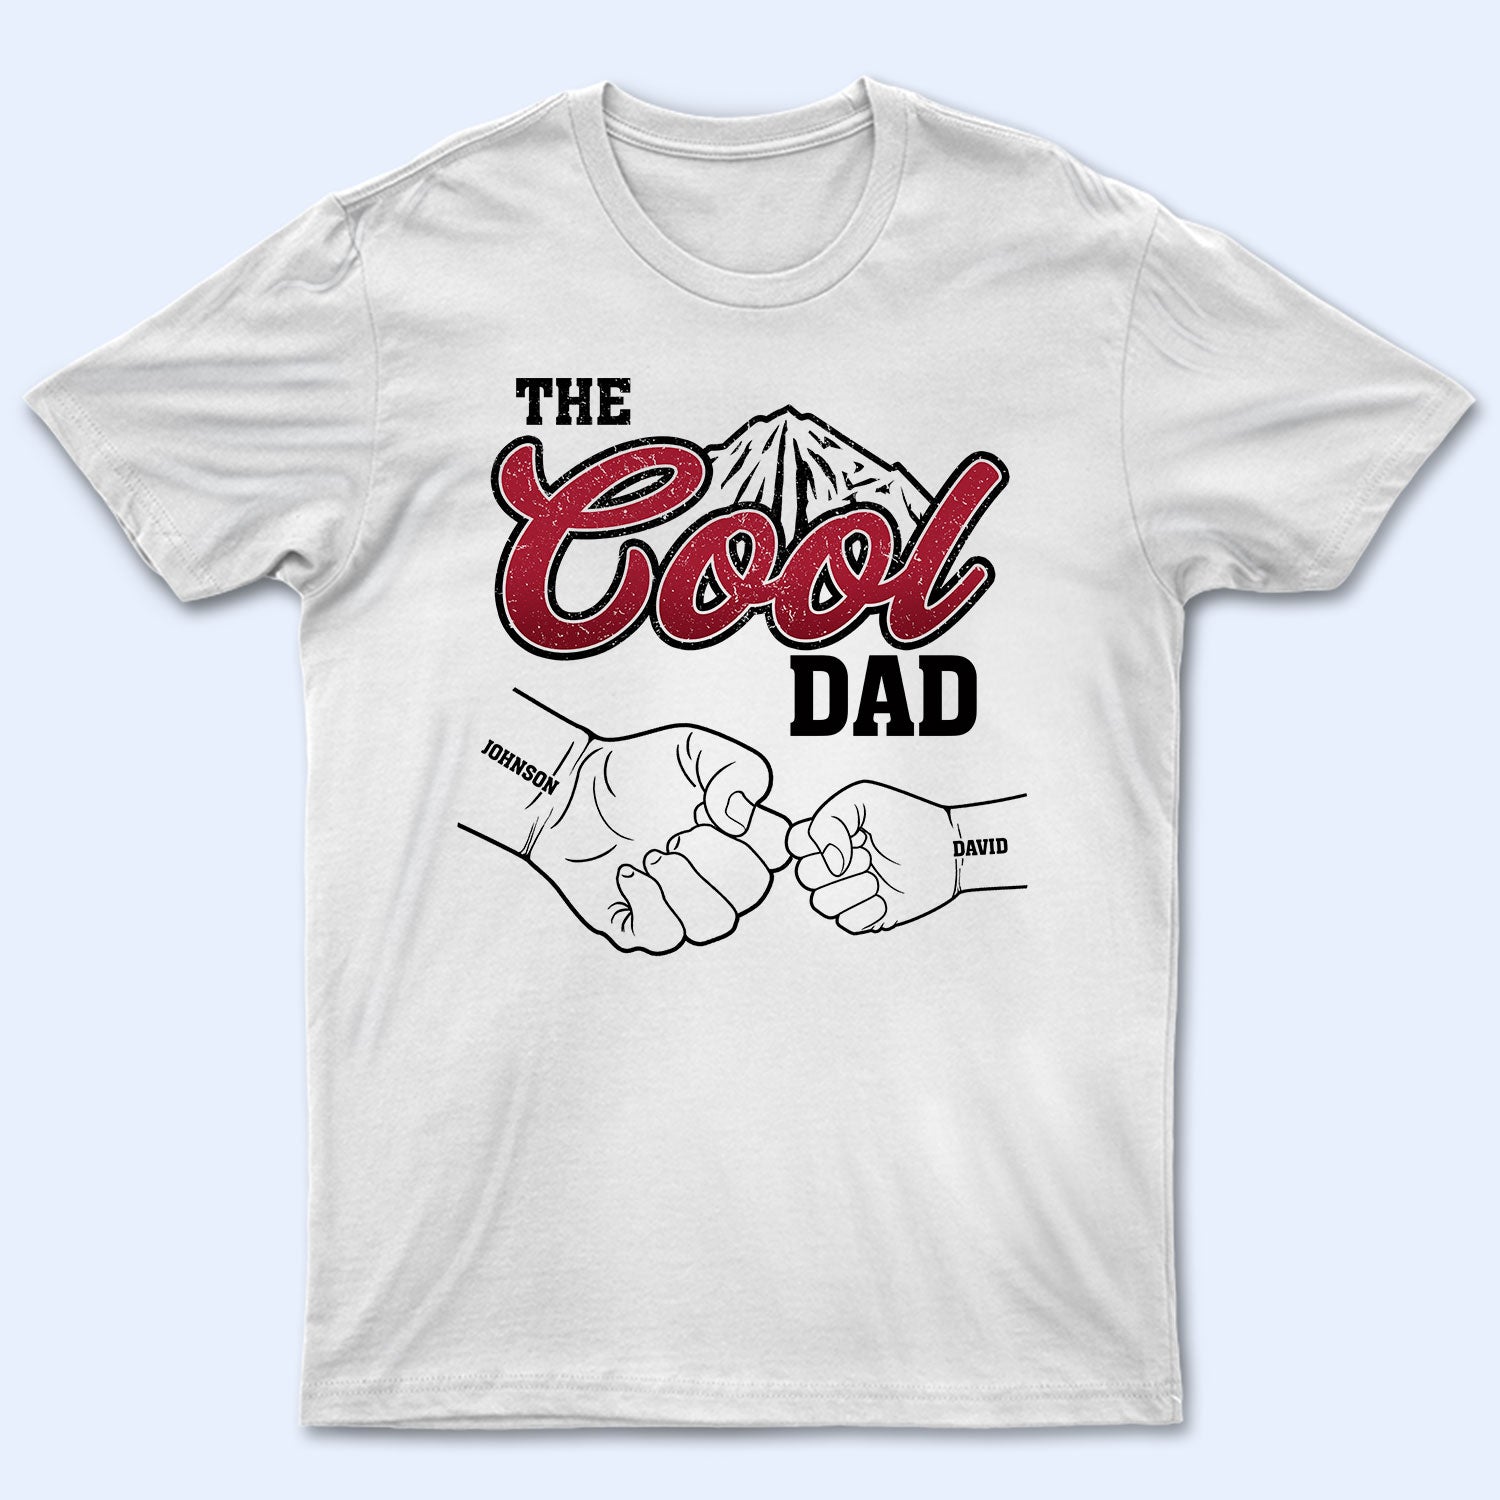 The Cool Dad - Birthday, Loving Gift For Father, Grandfather, Grandpa - Personalized T Shirt